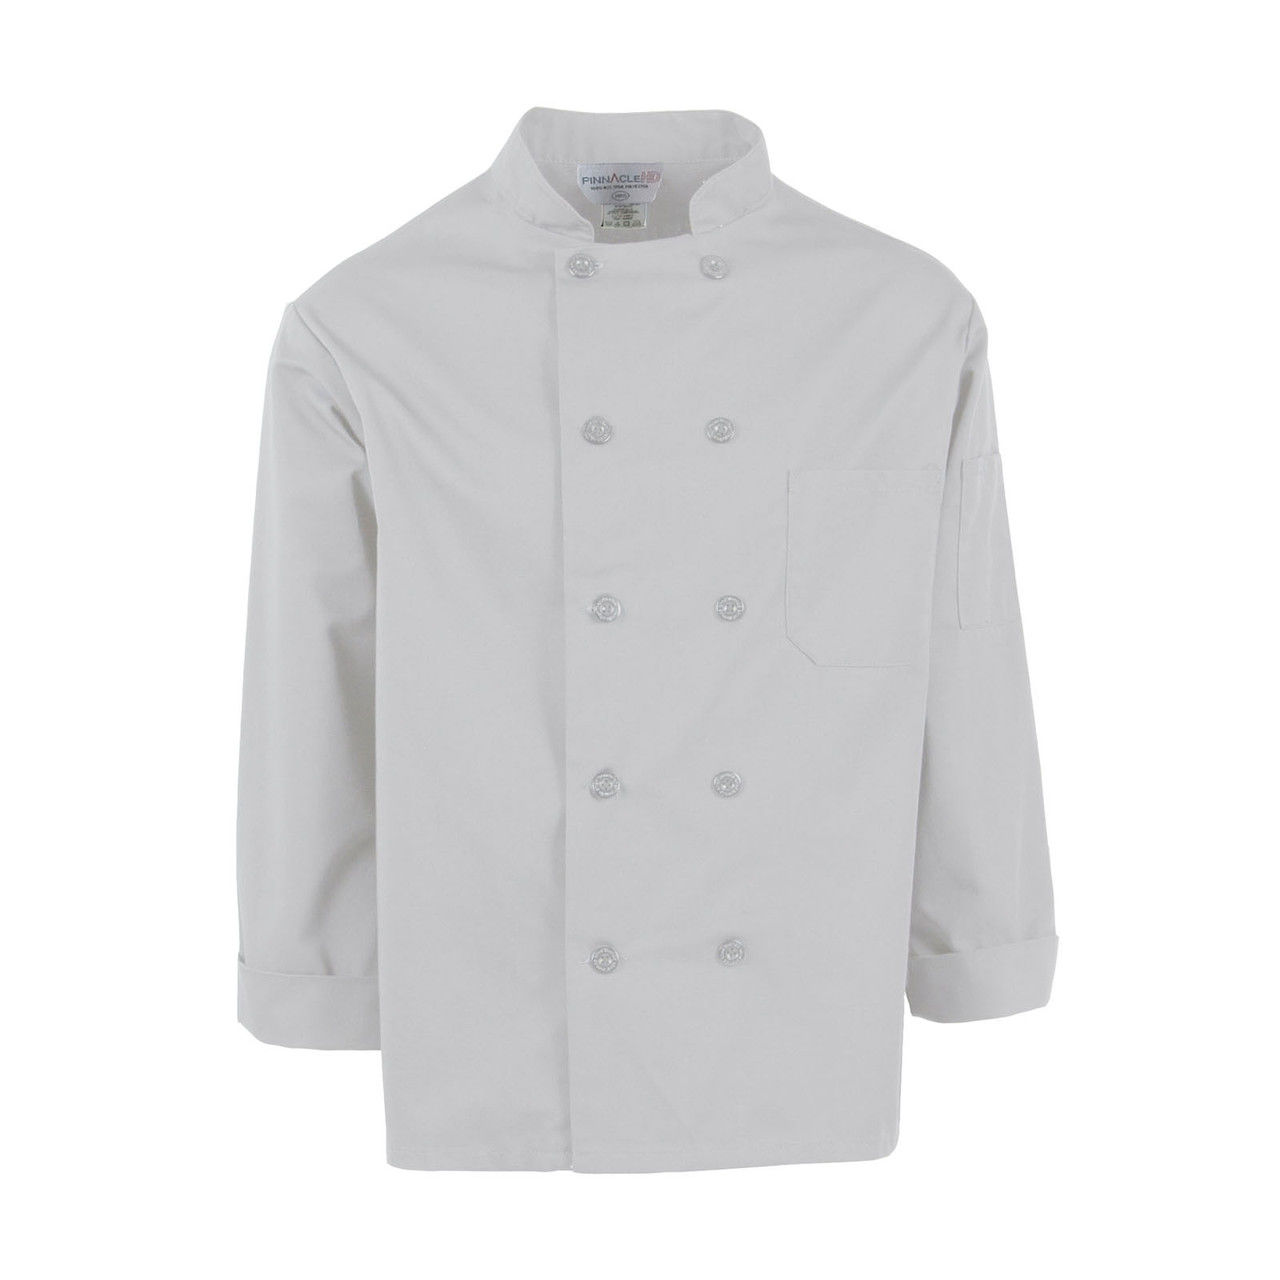 Does the chef jackets in white have many buttons?